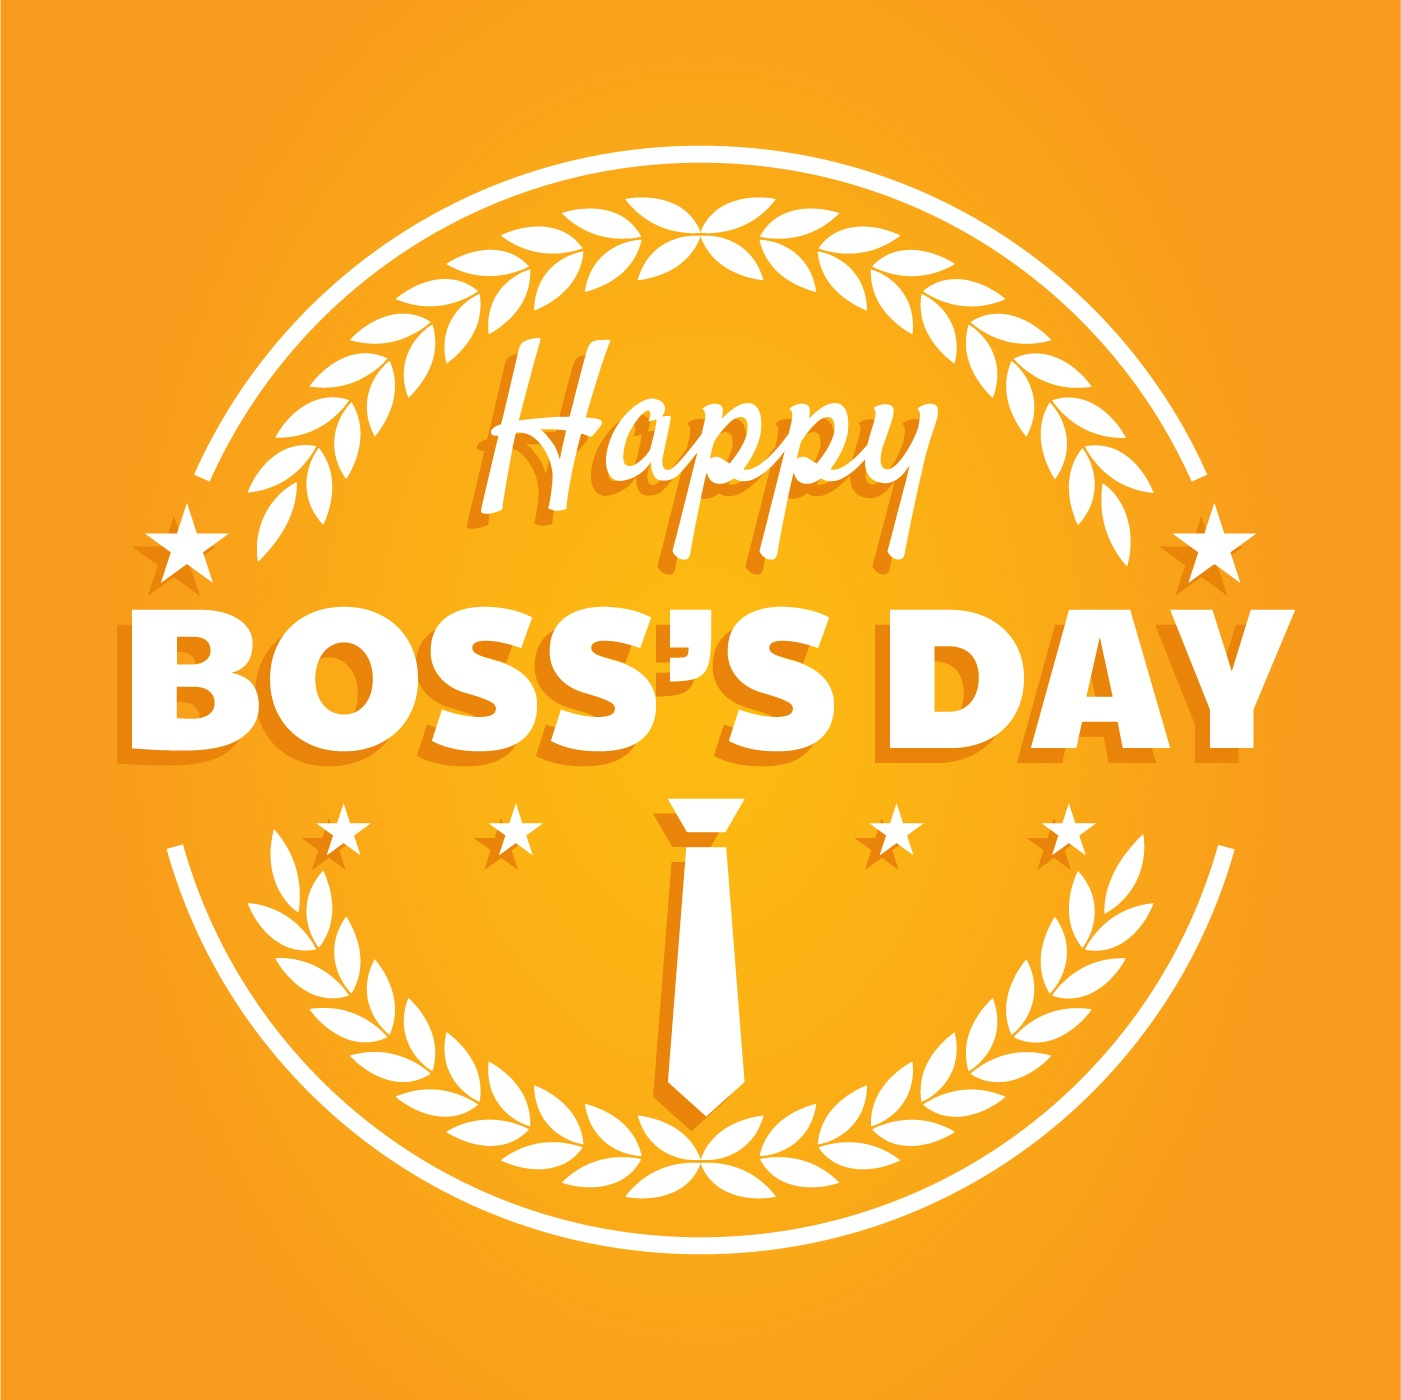 55 Latest Boss Day Wish Pictures And Photos Free Printable Boss s 